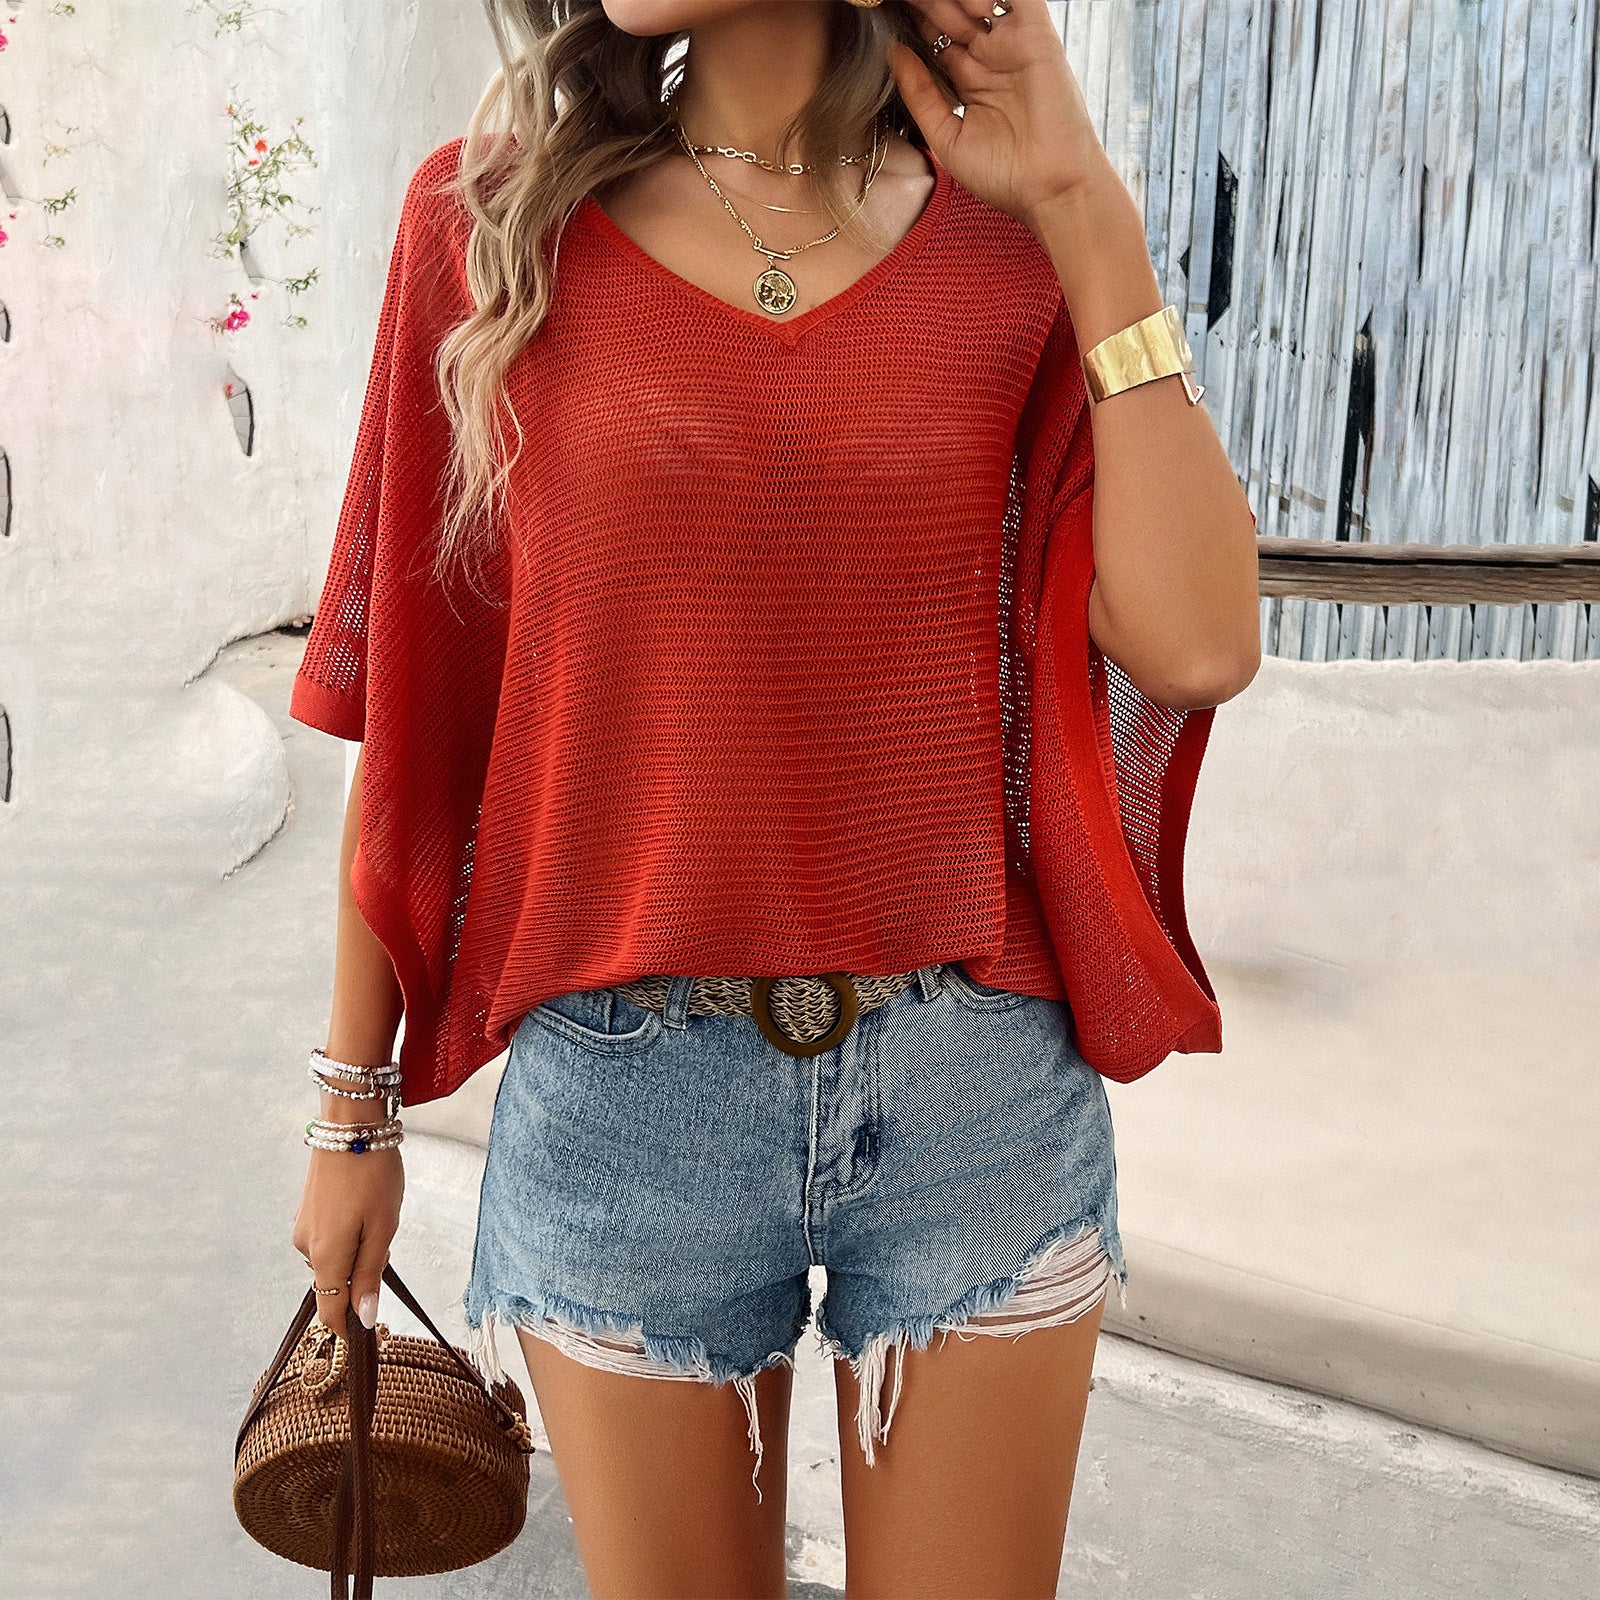 V-neck Bat Sleeve Short-sleeved T-shirt Top Summer Casual Loose Hollow Sweater Fashion Womens Clothing